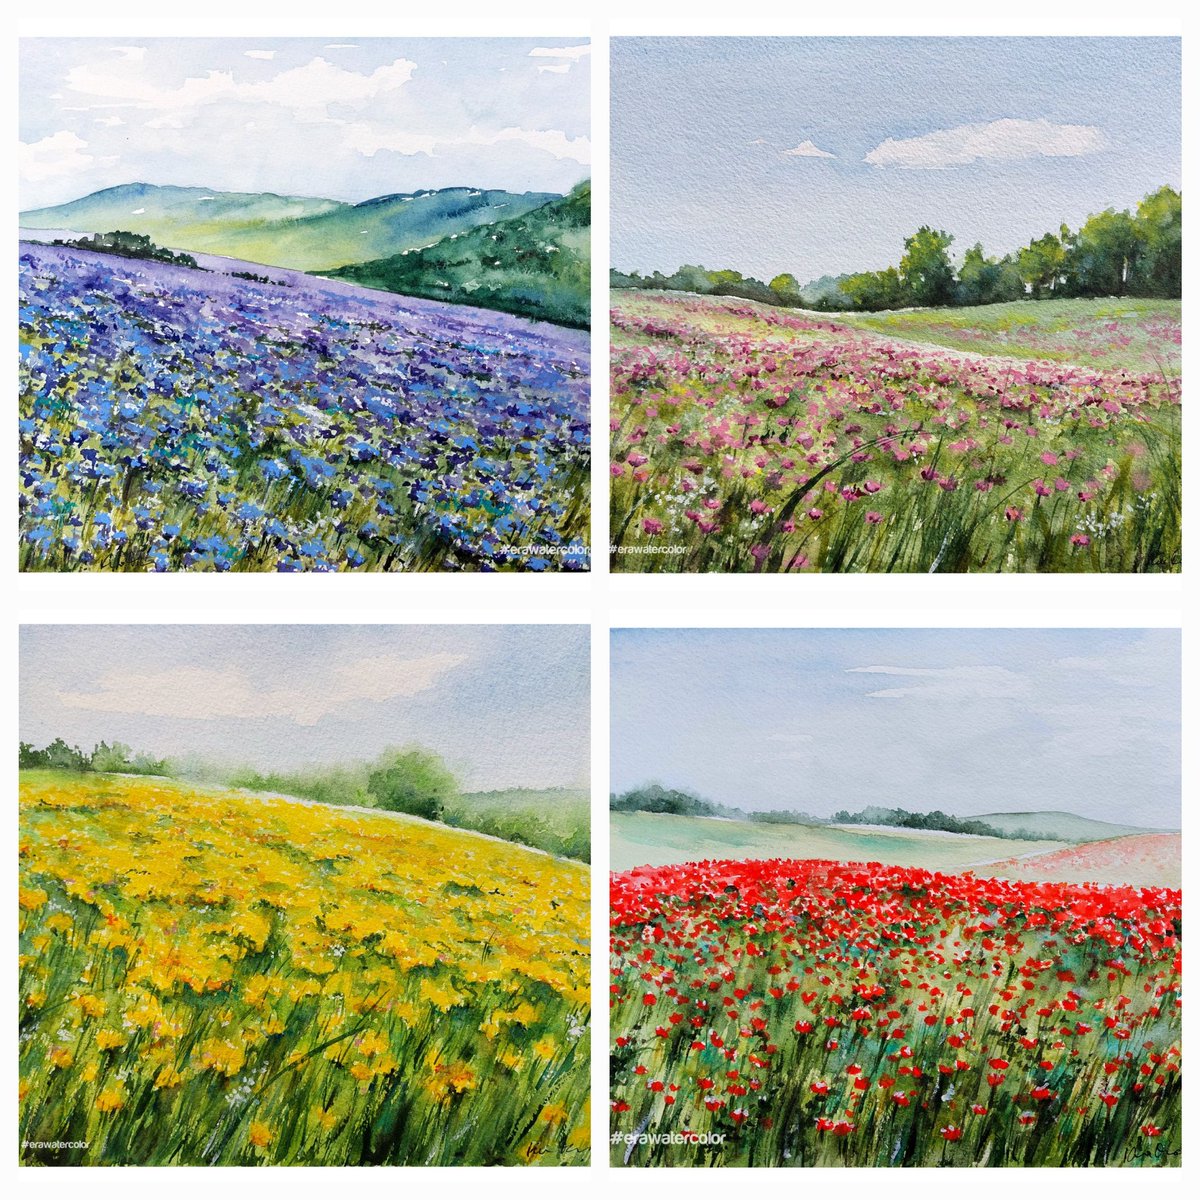 A harmony of colors that soothes the soul.
My #watercolor works.
#arte #art #landscape #blooming  #NatureLovers #painting